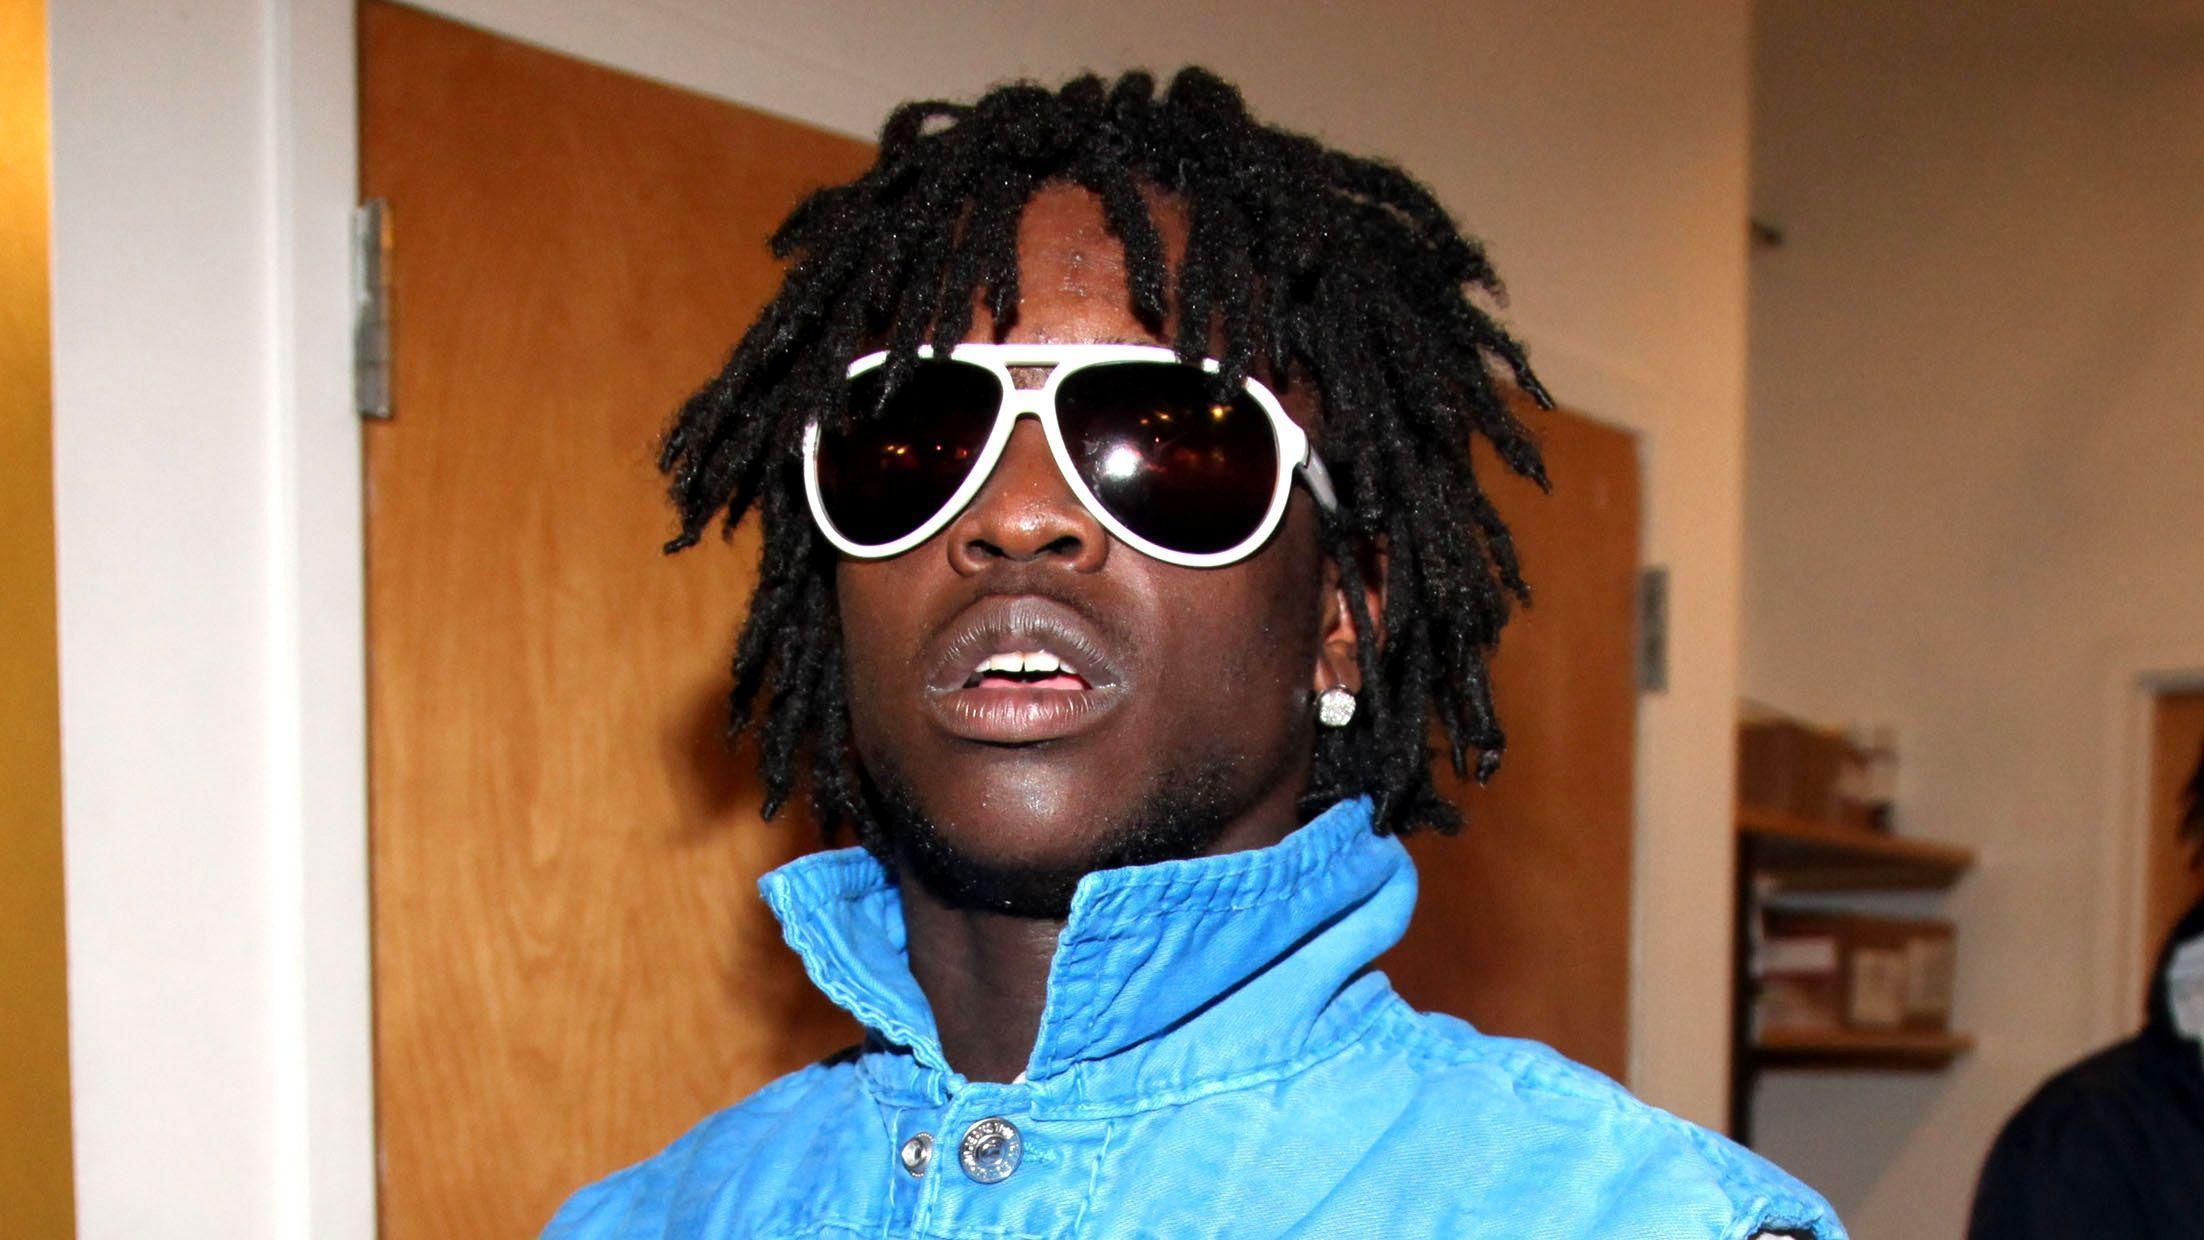 Chief Keef Wallpaper Image Photo Picture Background